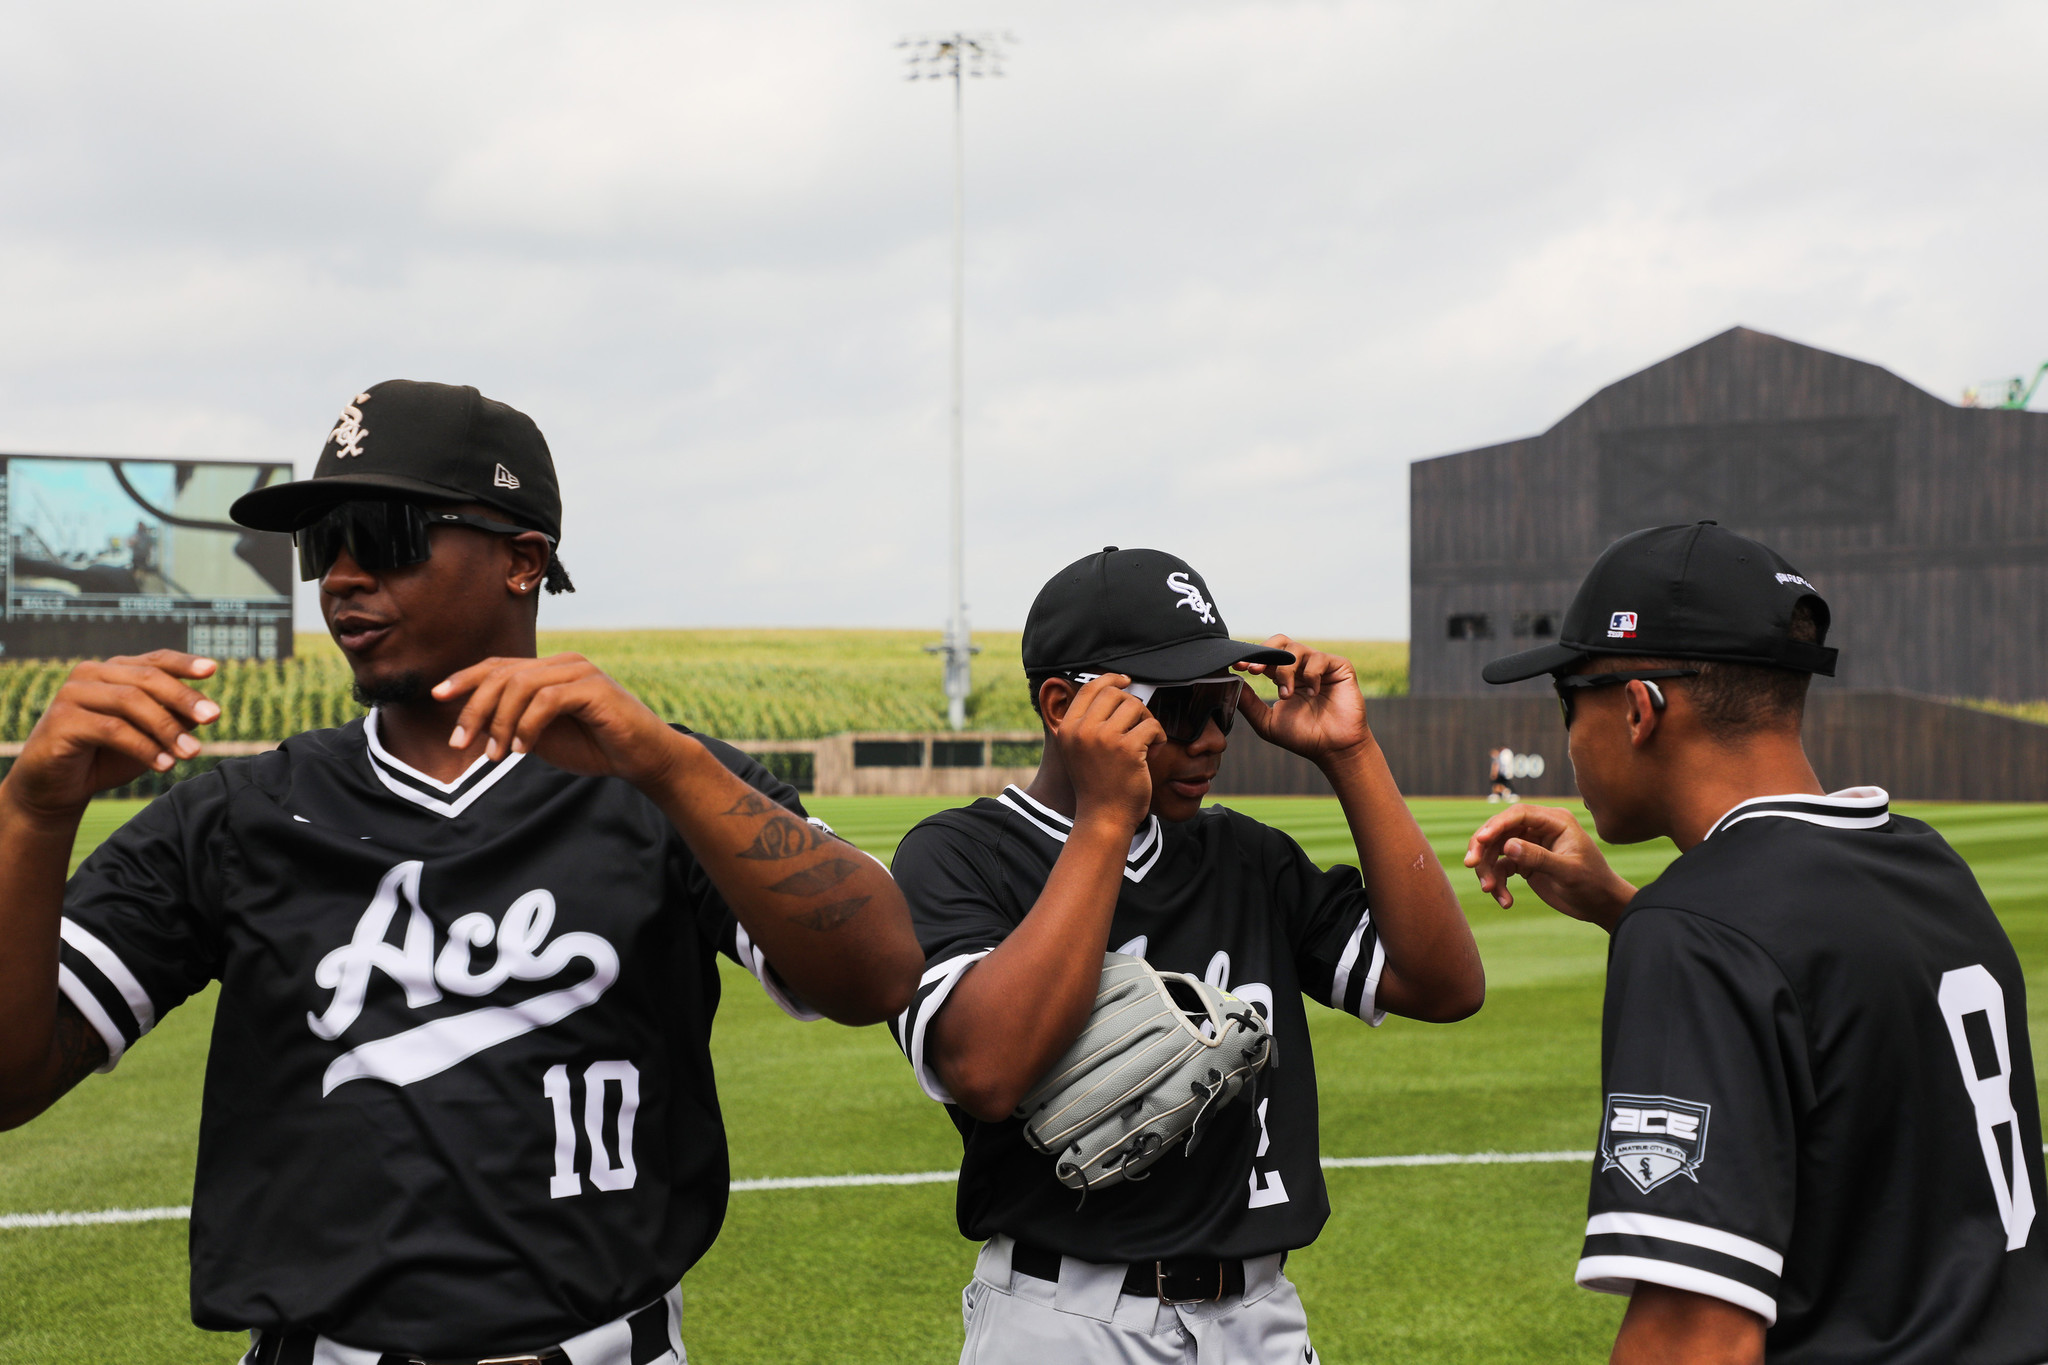 Photos: White Sox ACE team at Field of Dreams